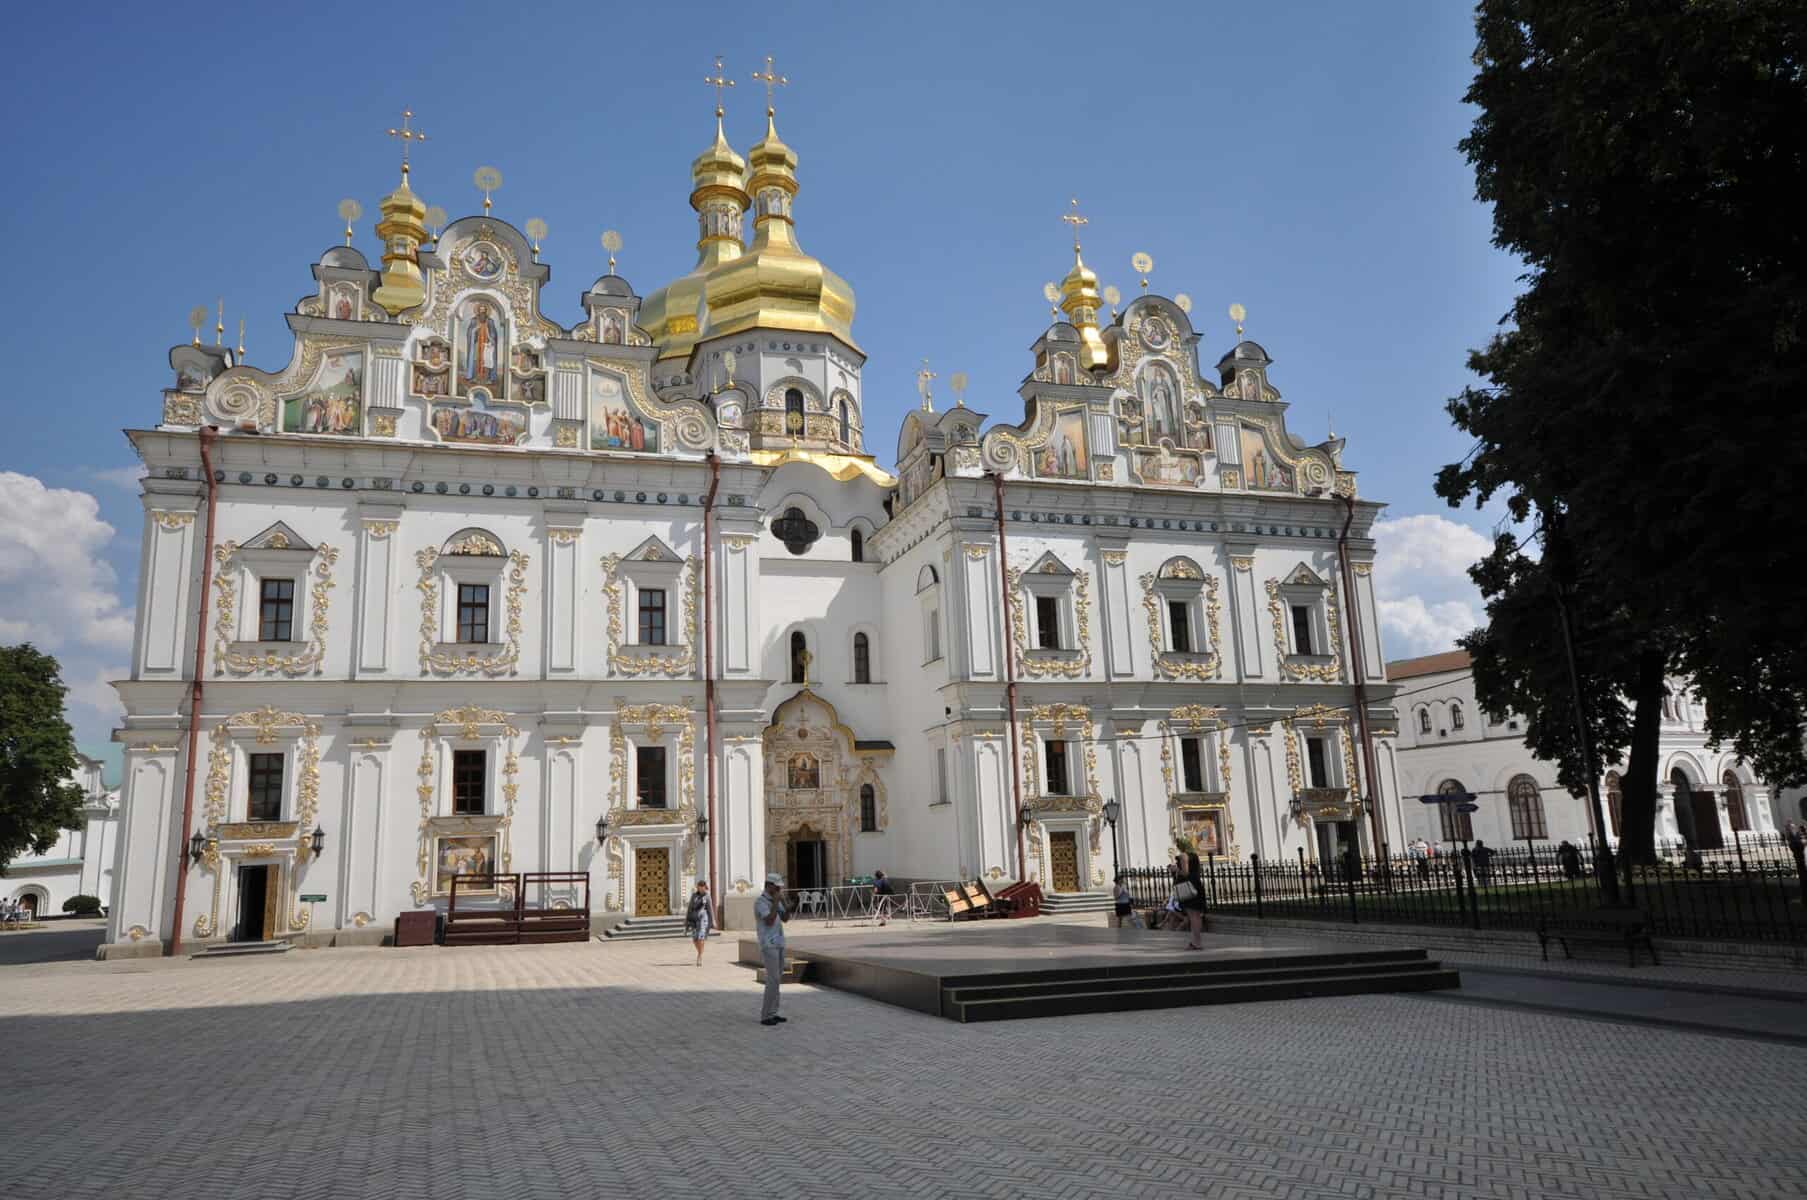 The Cathedral of the Dormition is shown with its white stone and golden cupolas.